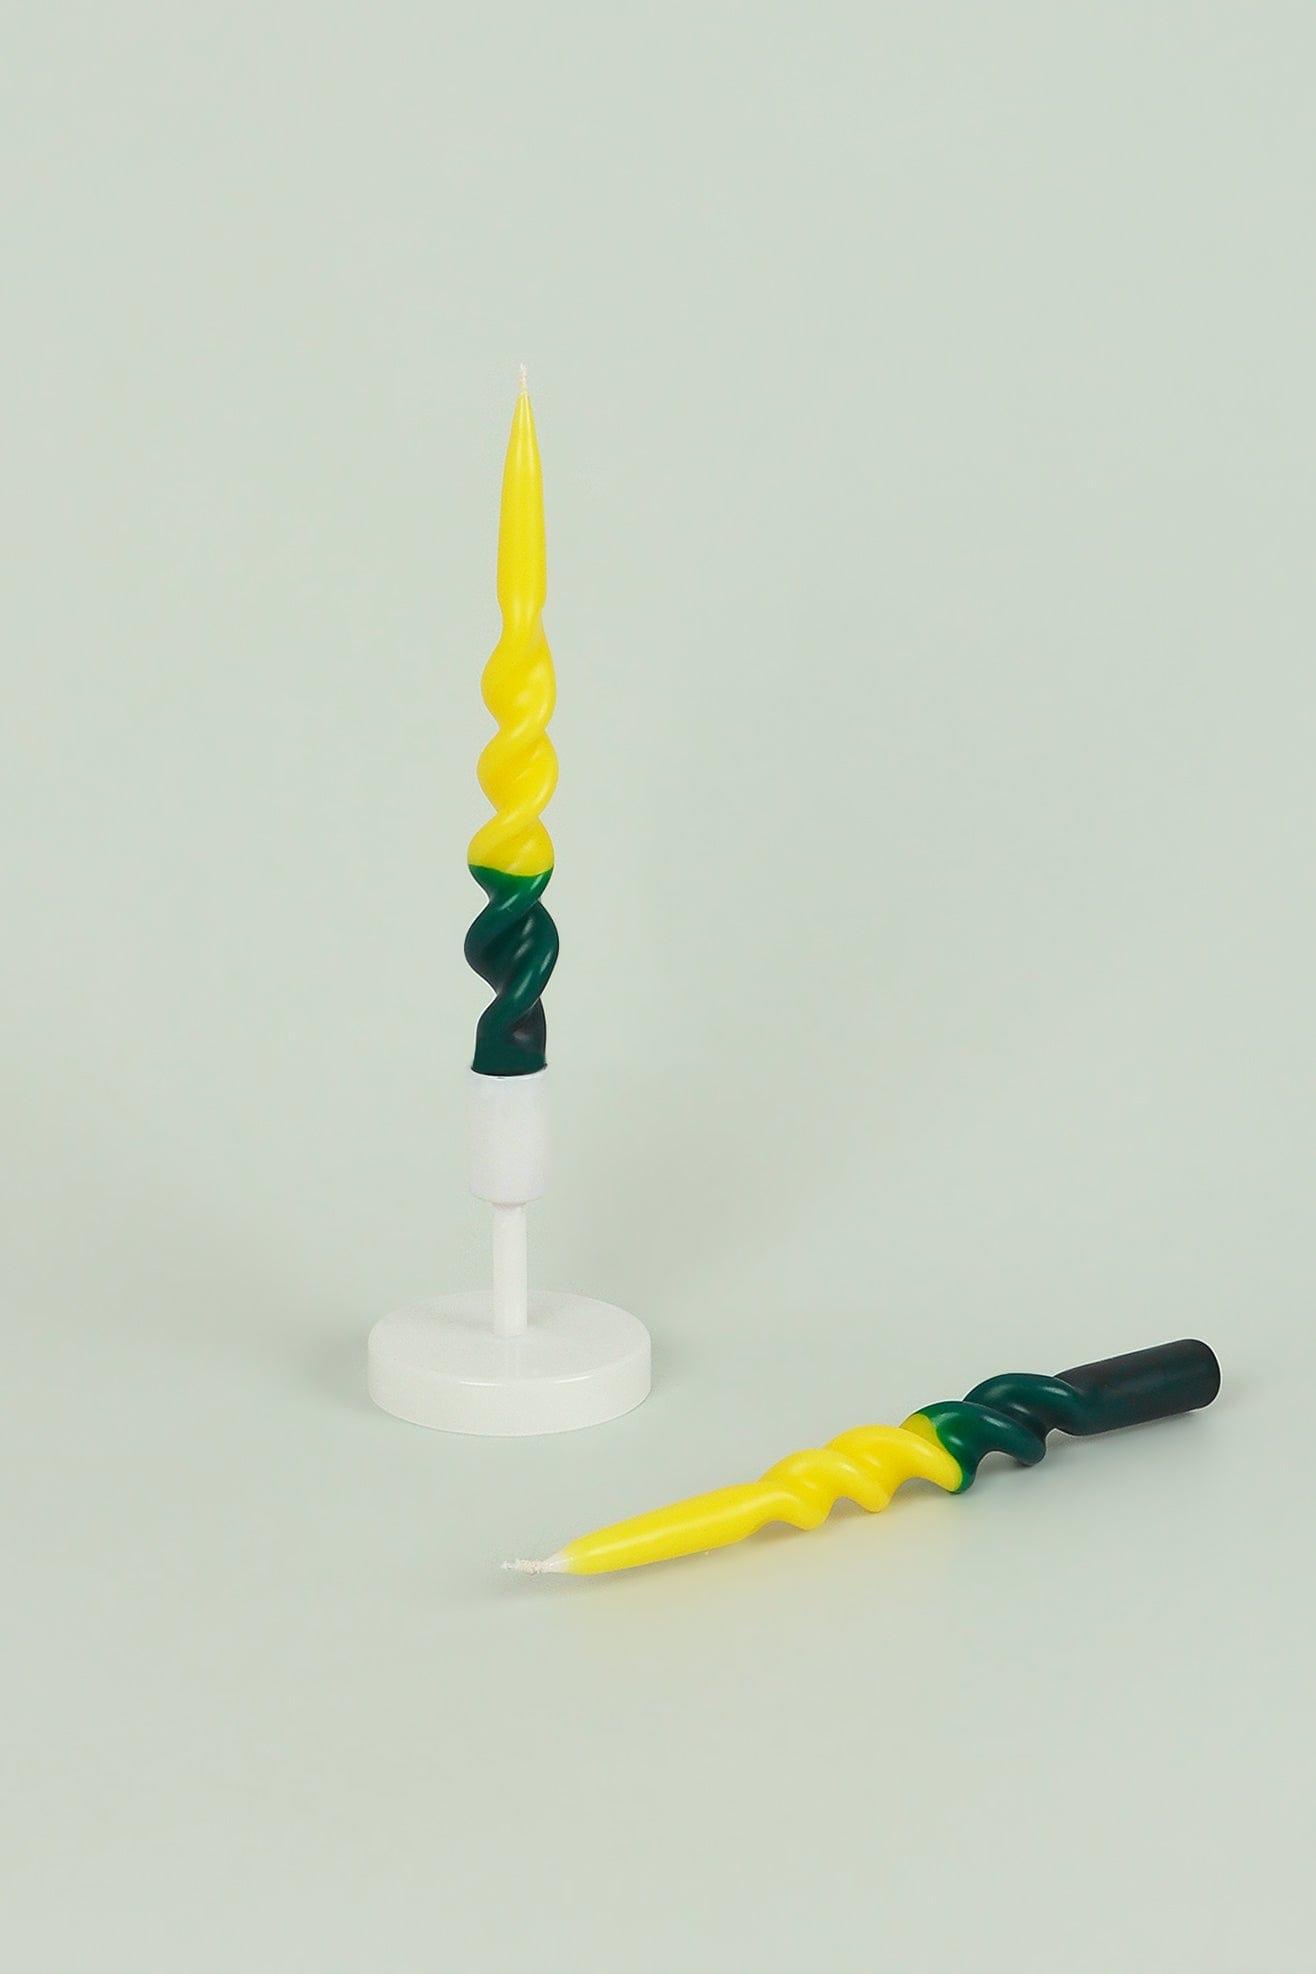 G Decor Candles Green Set of Two-Toned Yellow and Dark Green Spiral Twisted Hand Dipped Candlesticks Taper Church Dinner Candles